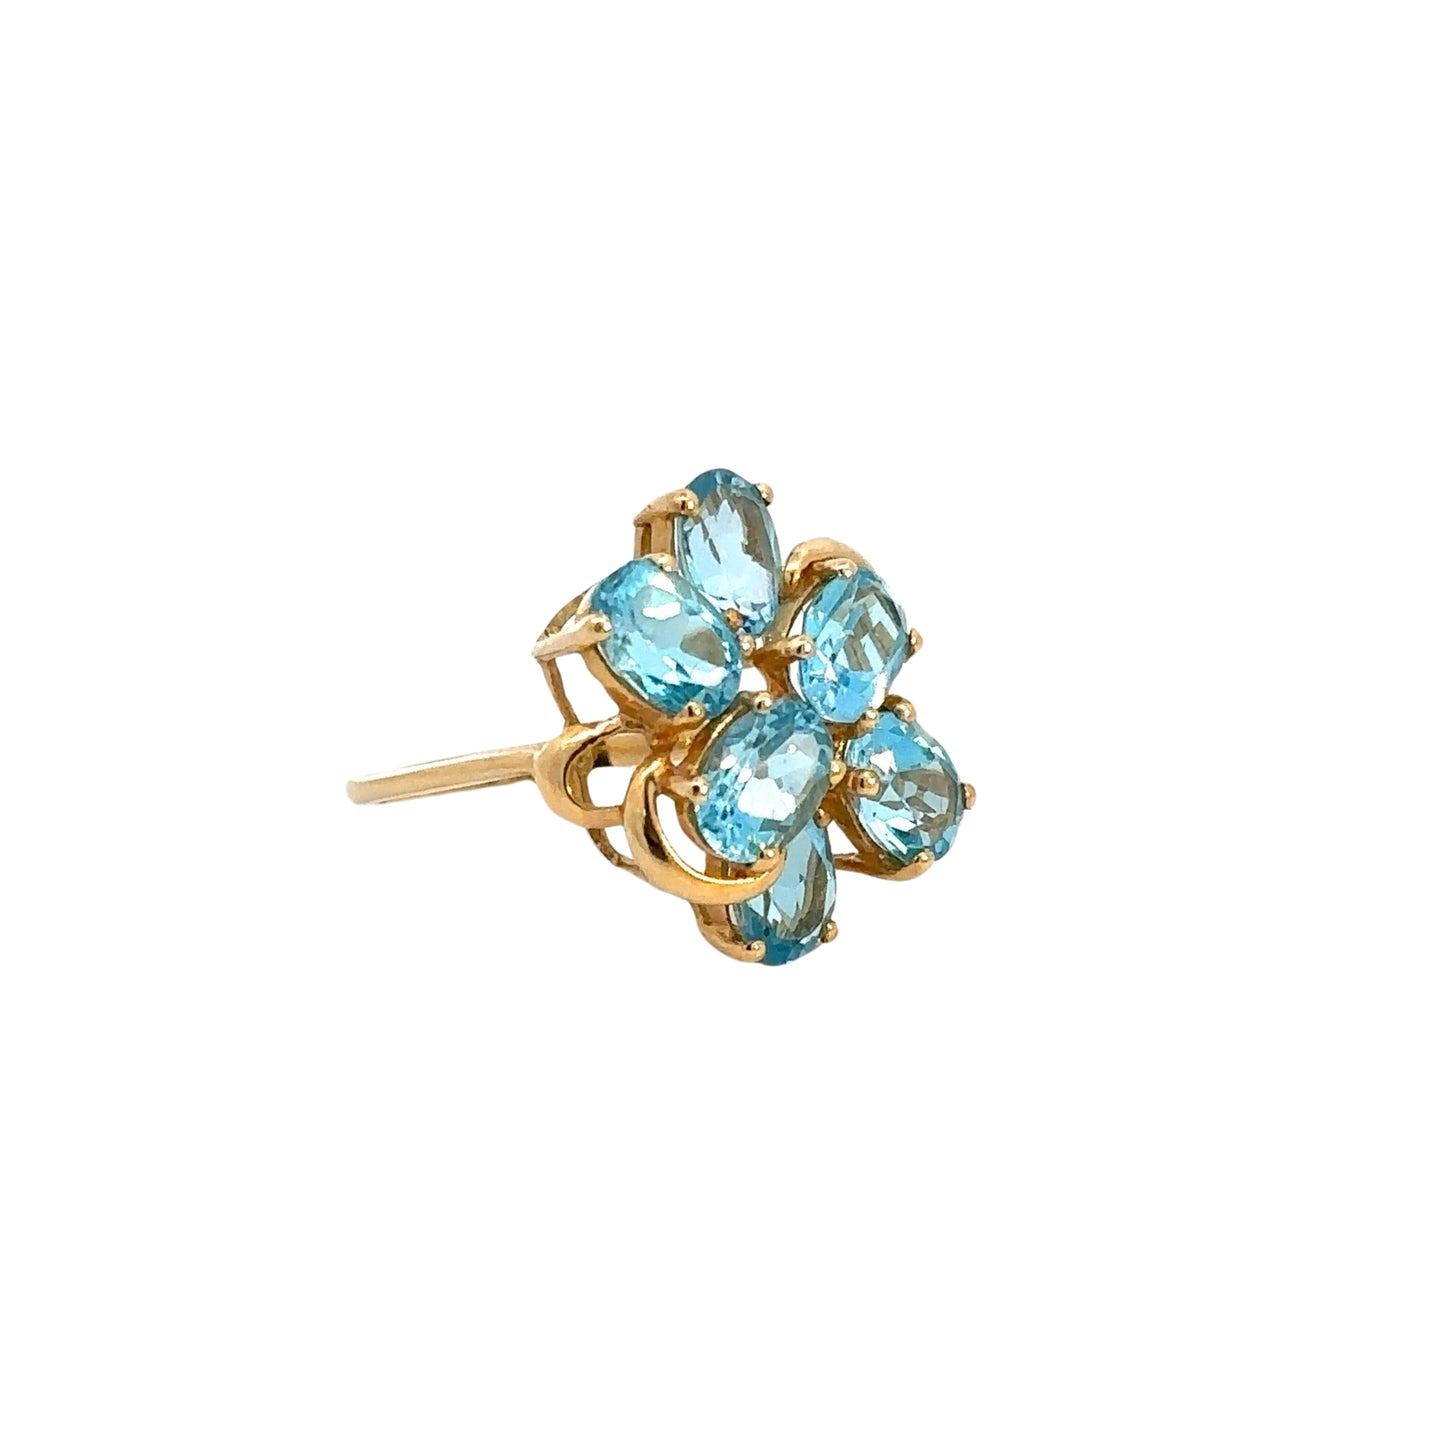 Diagonal view of 6 blue gemstone ring in yellow gold